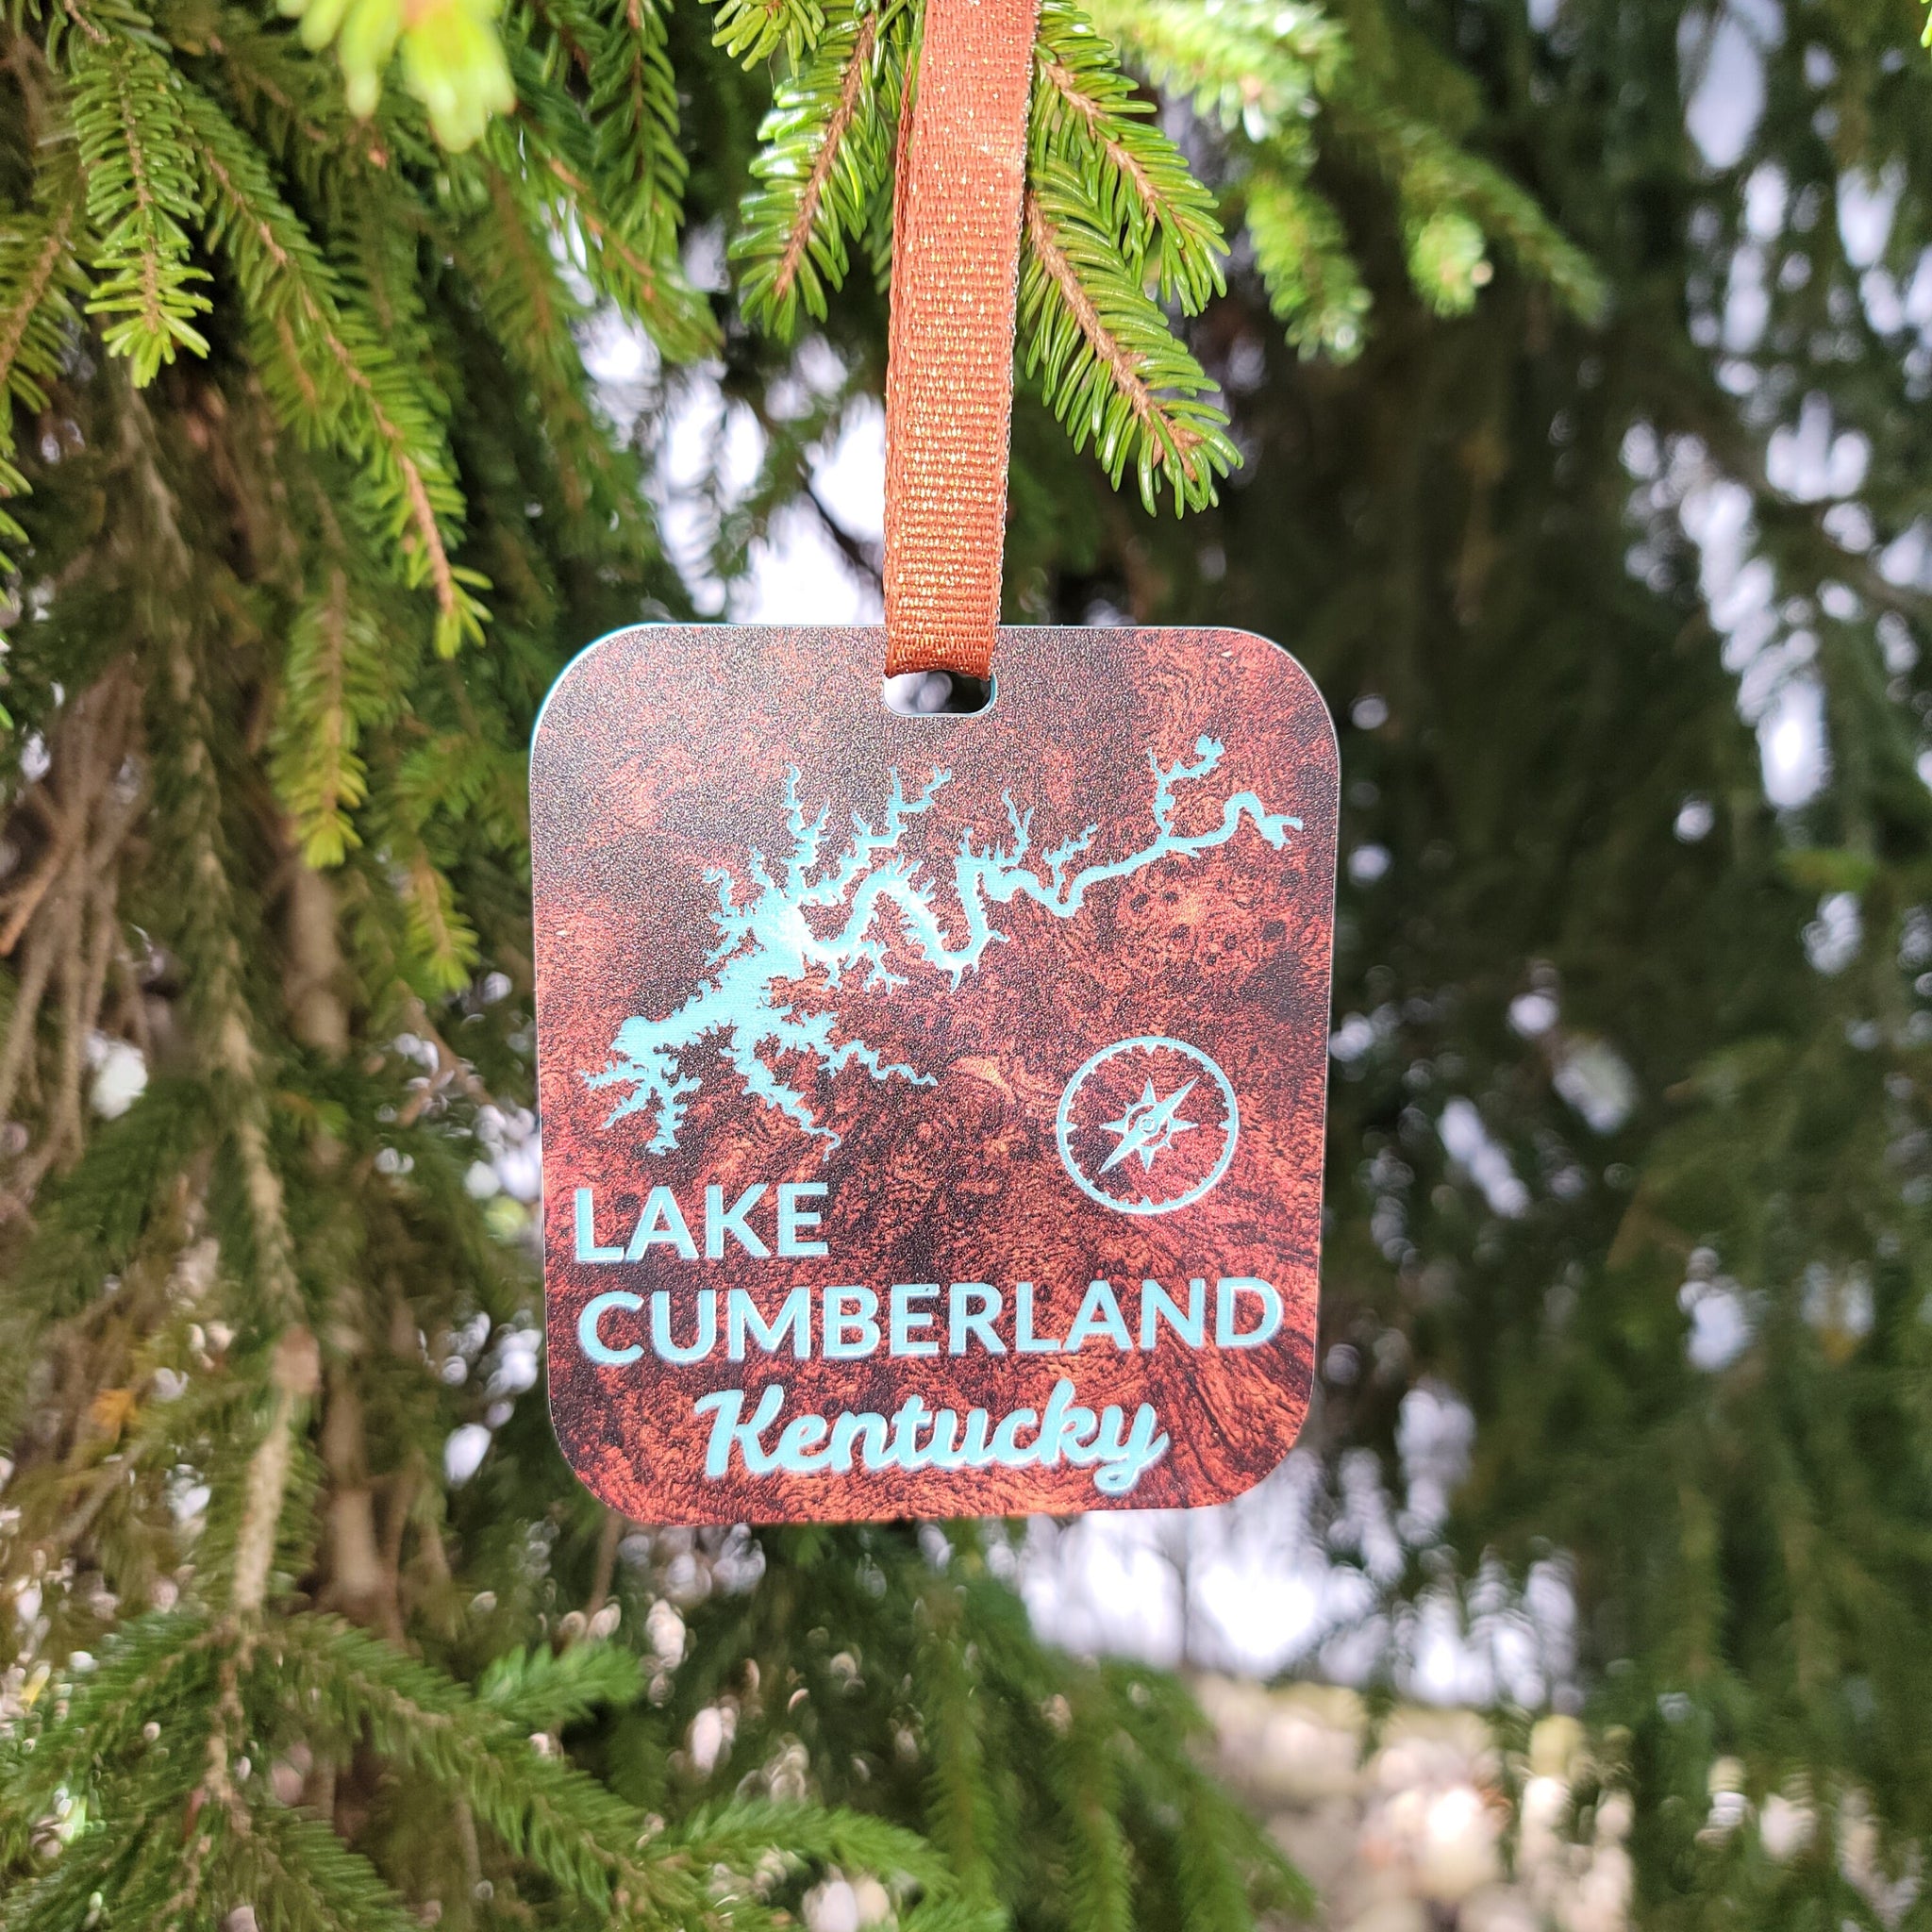 Lake Cumberland Kentucky Ornament 3.75" Acrylic Laser Cut Christmas Ornaments KY Made In USA Gift Laser Cut